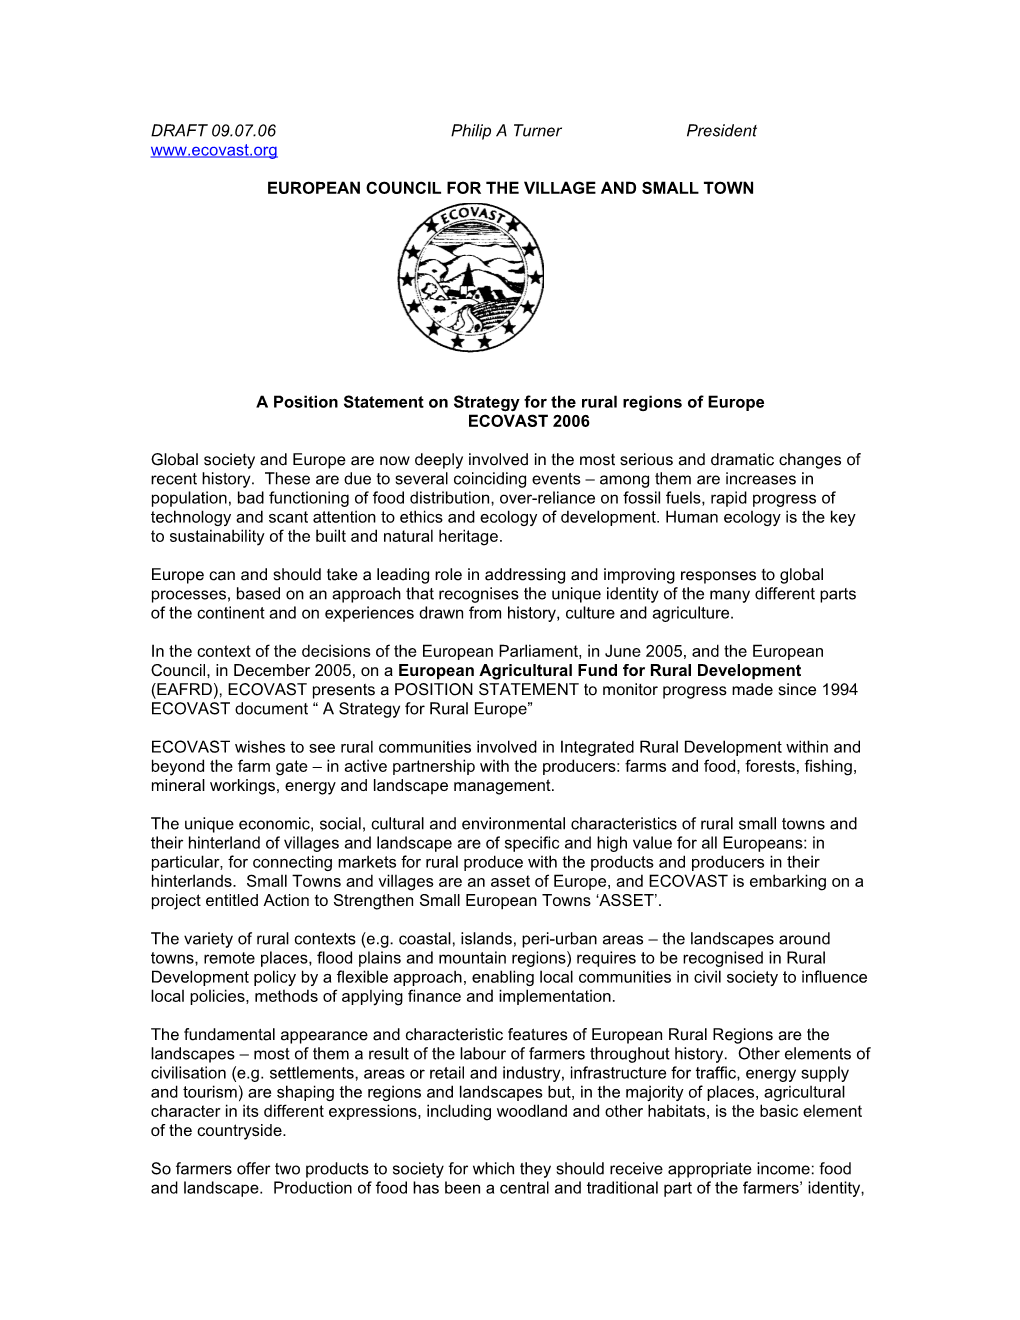 A Position Statement on Strategy for the Rural Regions of Europeecovast 2006